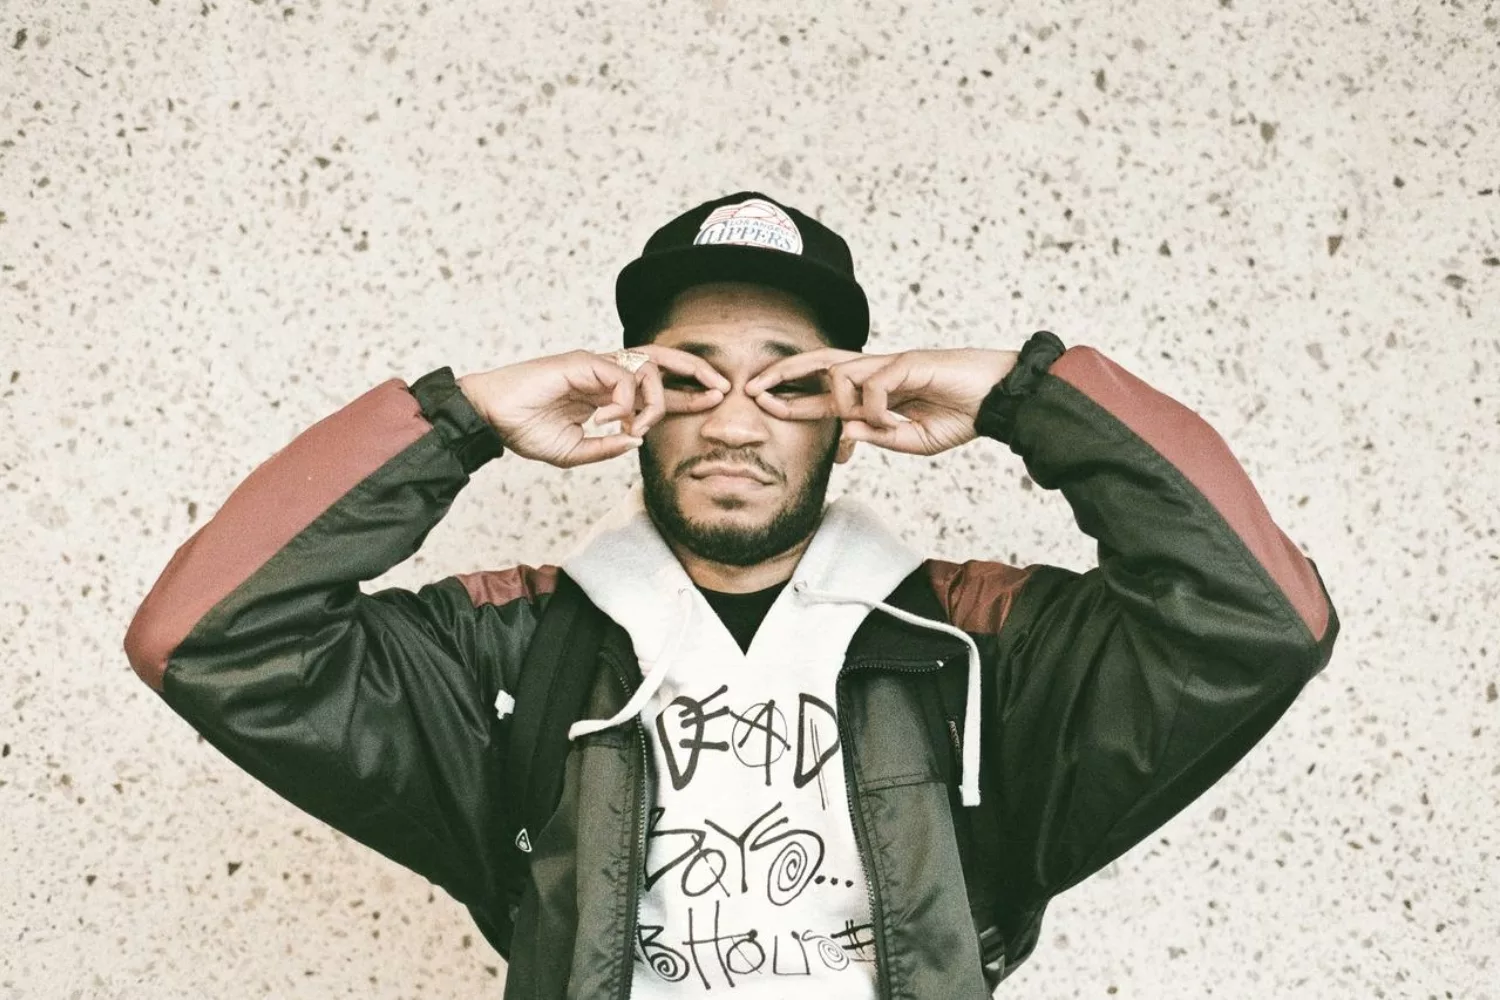 Kaytranada's working on a collaboration with Chance the Rapper